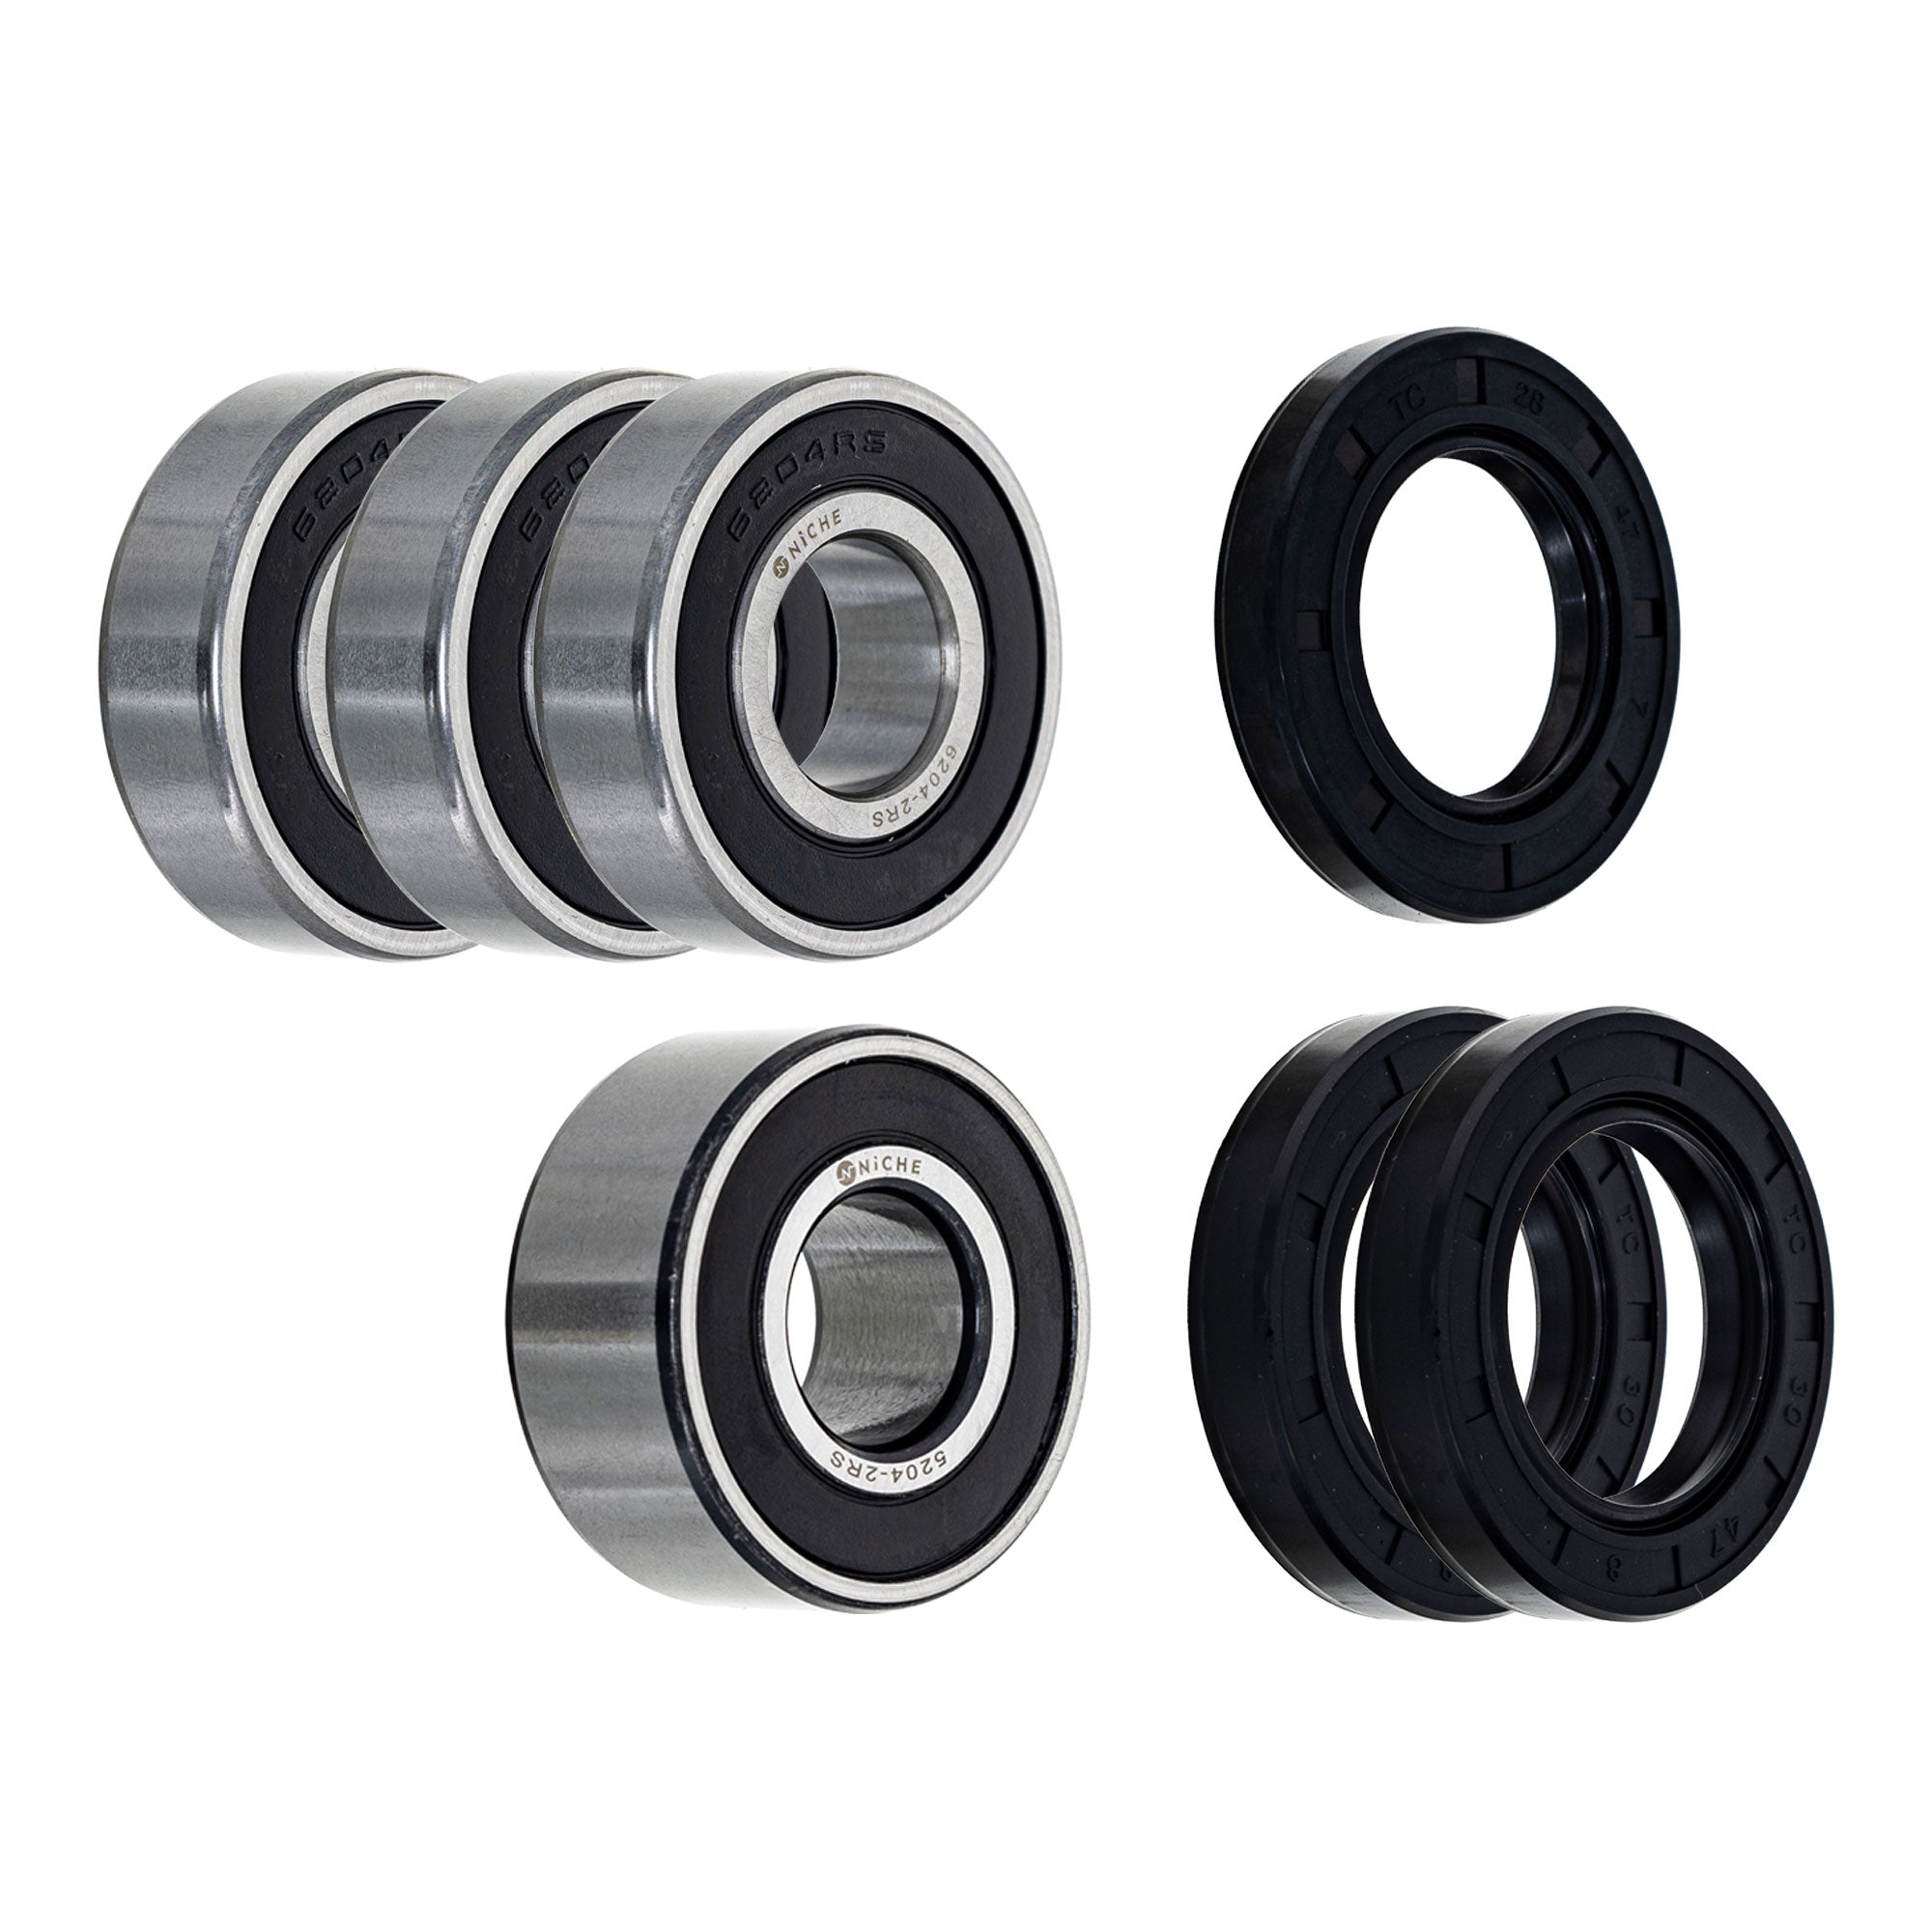 Wheel Bearing Seal Kit for zOTHER Ref No Shadow NICHE MK1008517